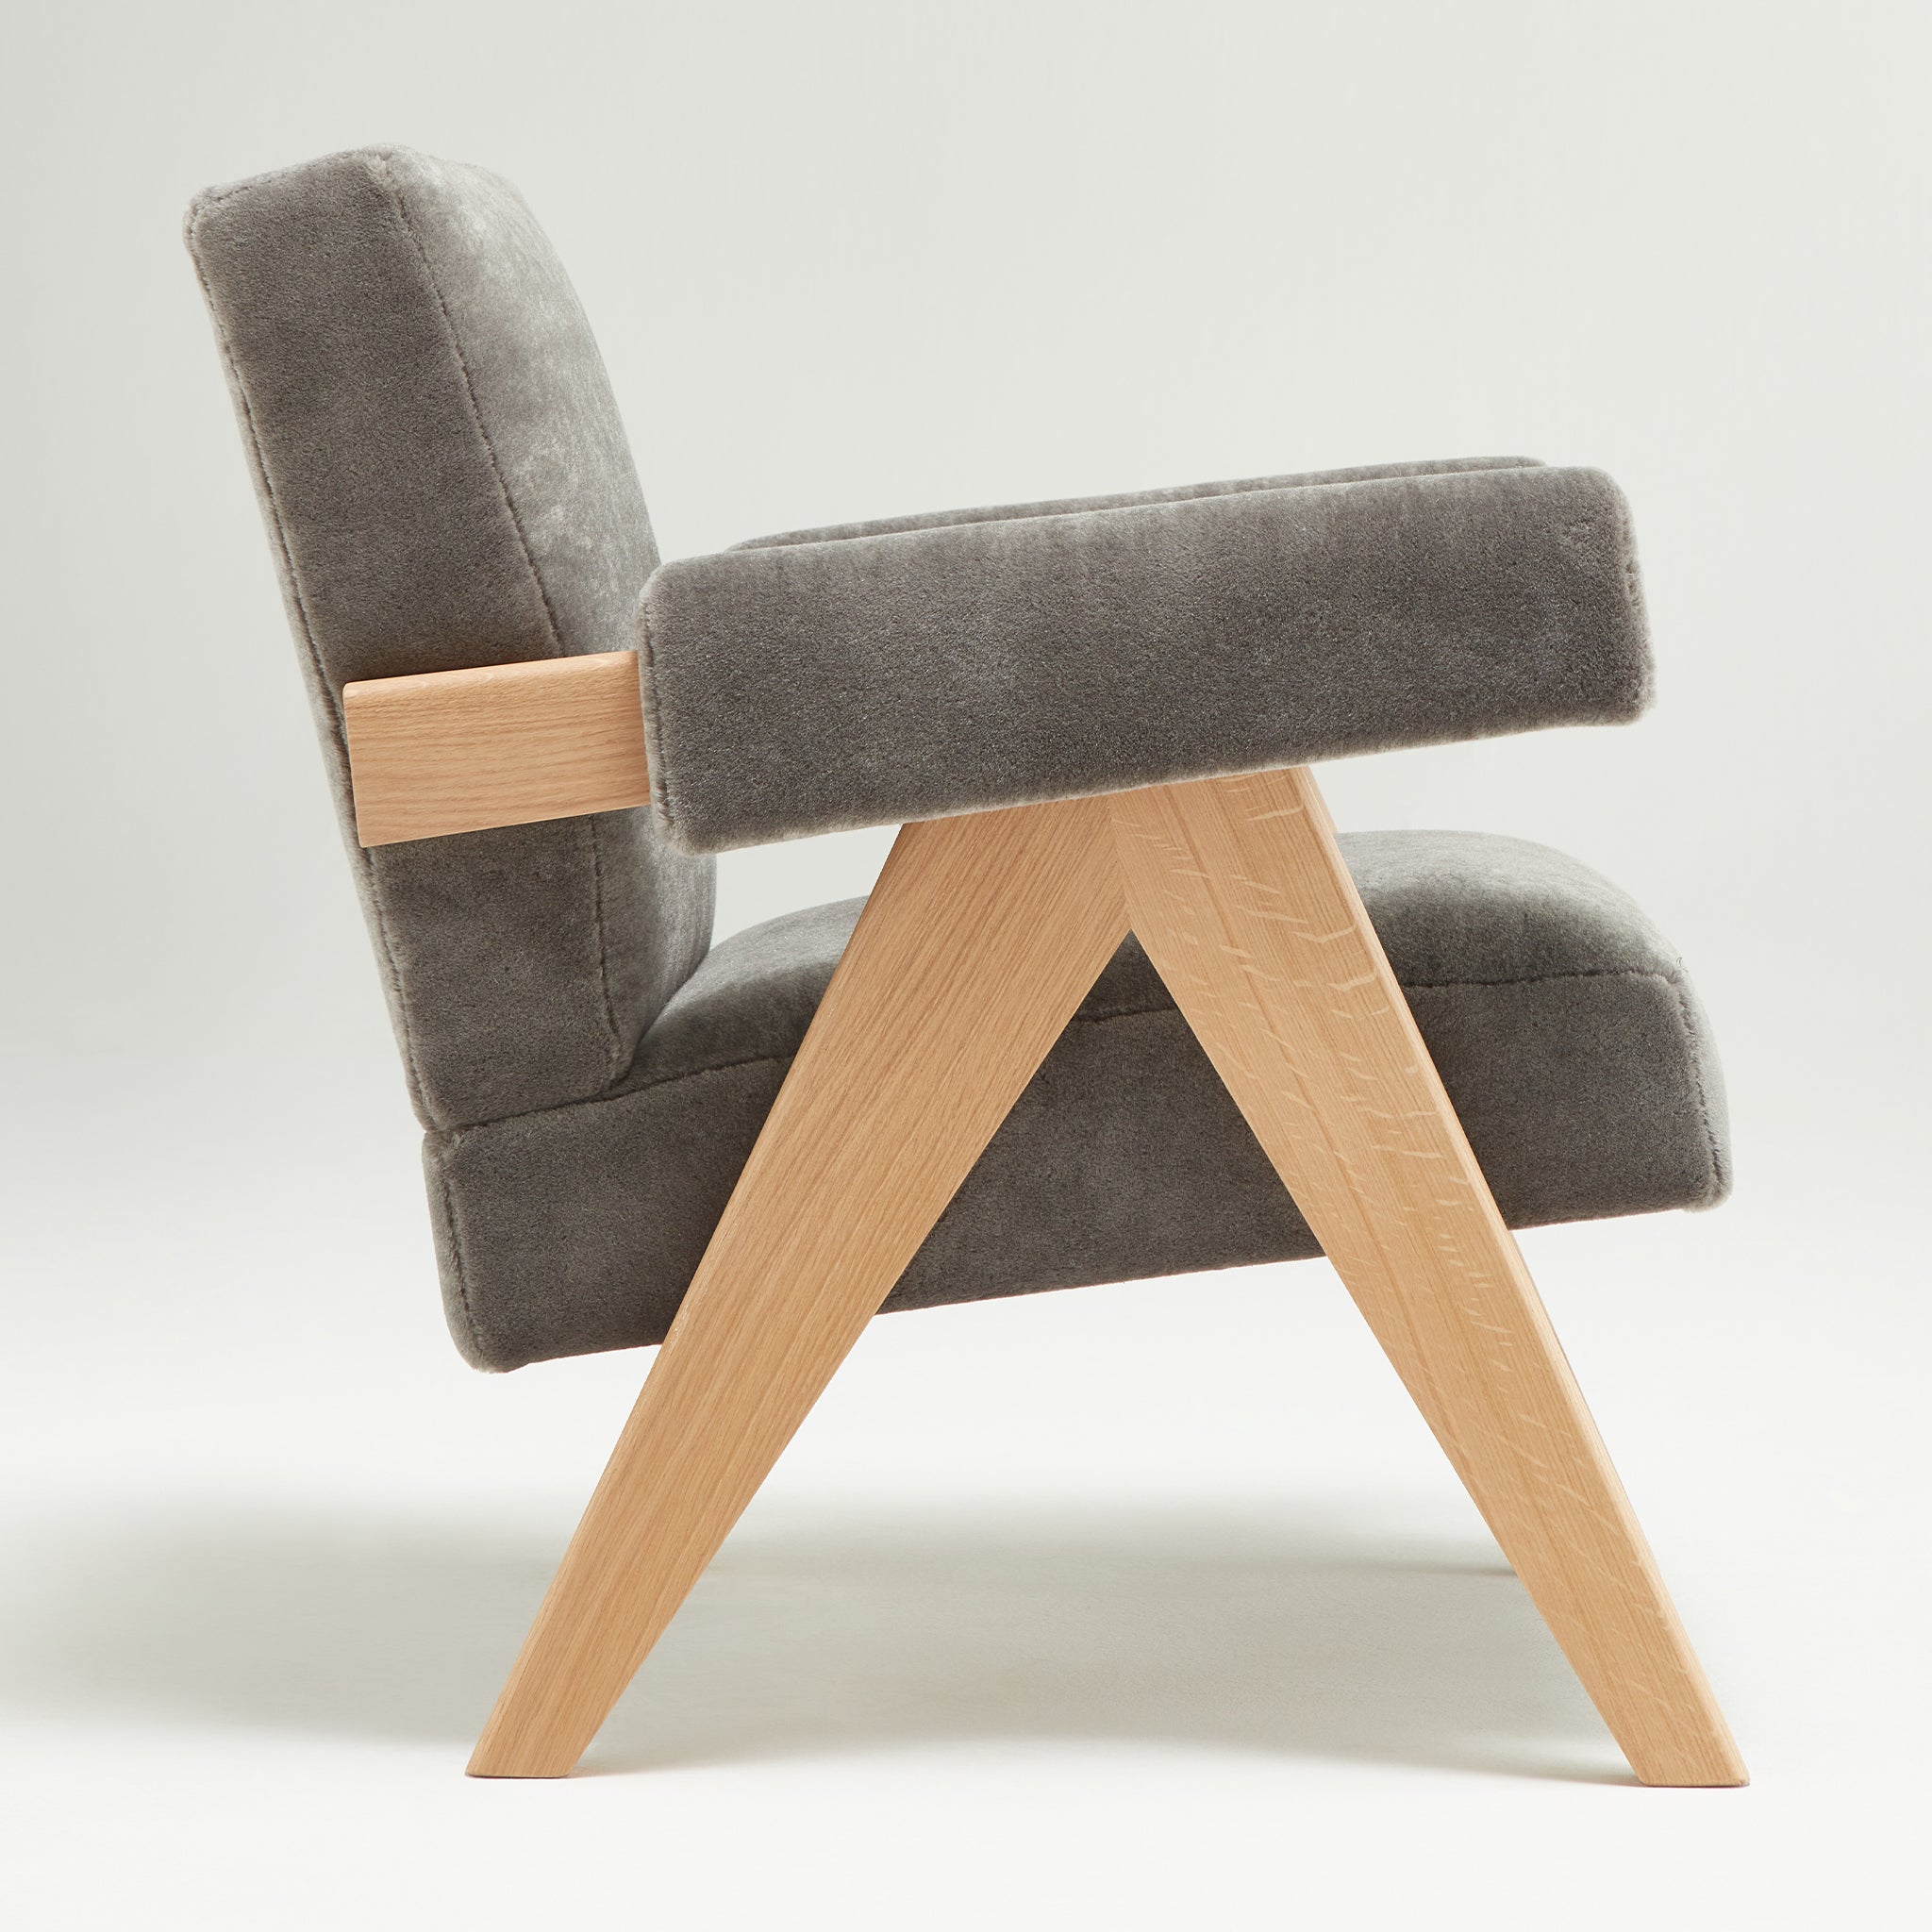 Side view of an authentic chandigarh lounge chair, pierre jeanneret era, natural oak frame, pierre frey elephant teddy mohair upholstery, by Klarel #K35-34